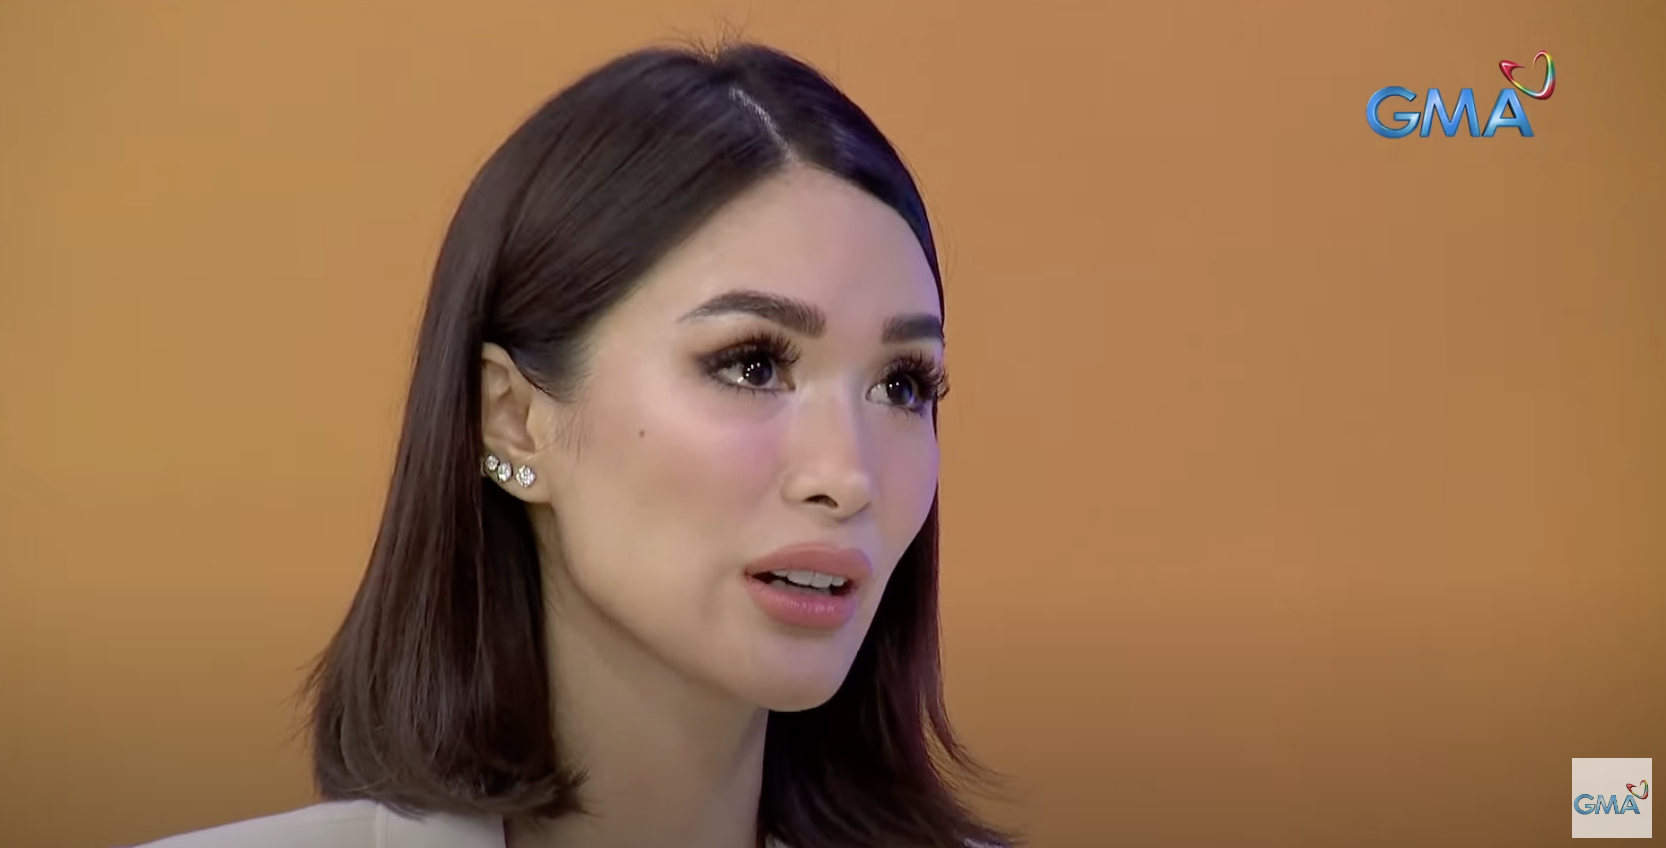 I didn't realize how much I wanted it': Heart Evangelista opens up